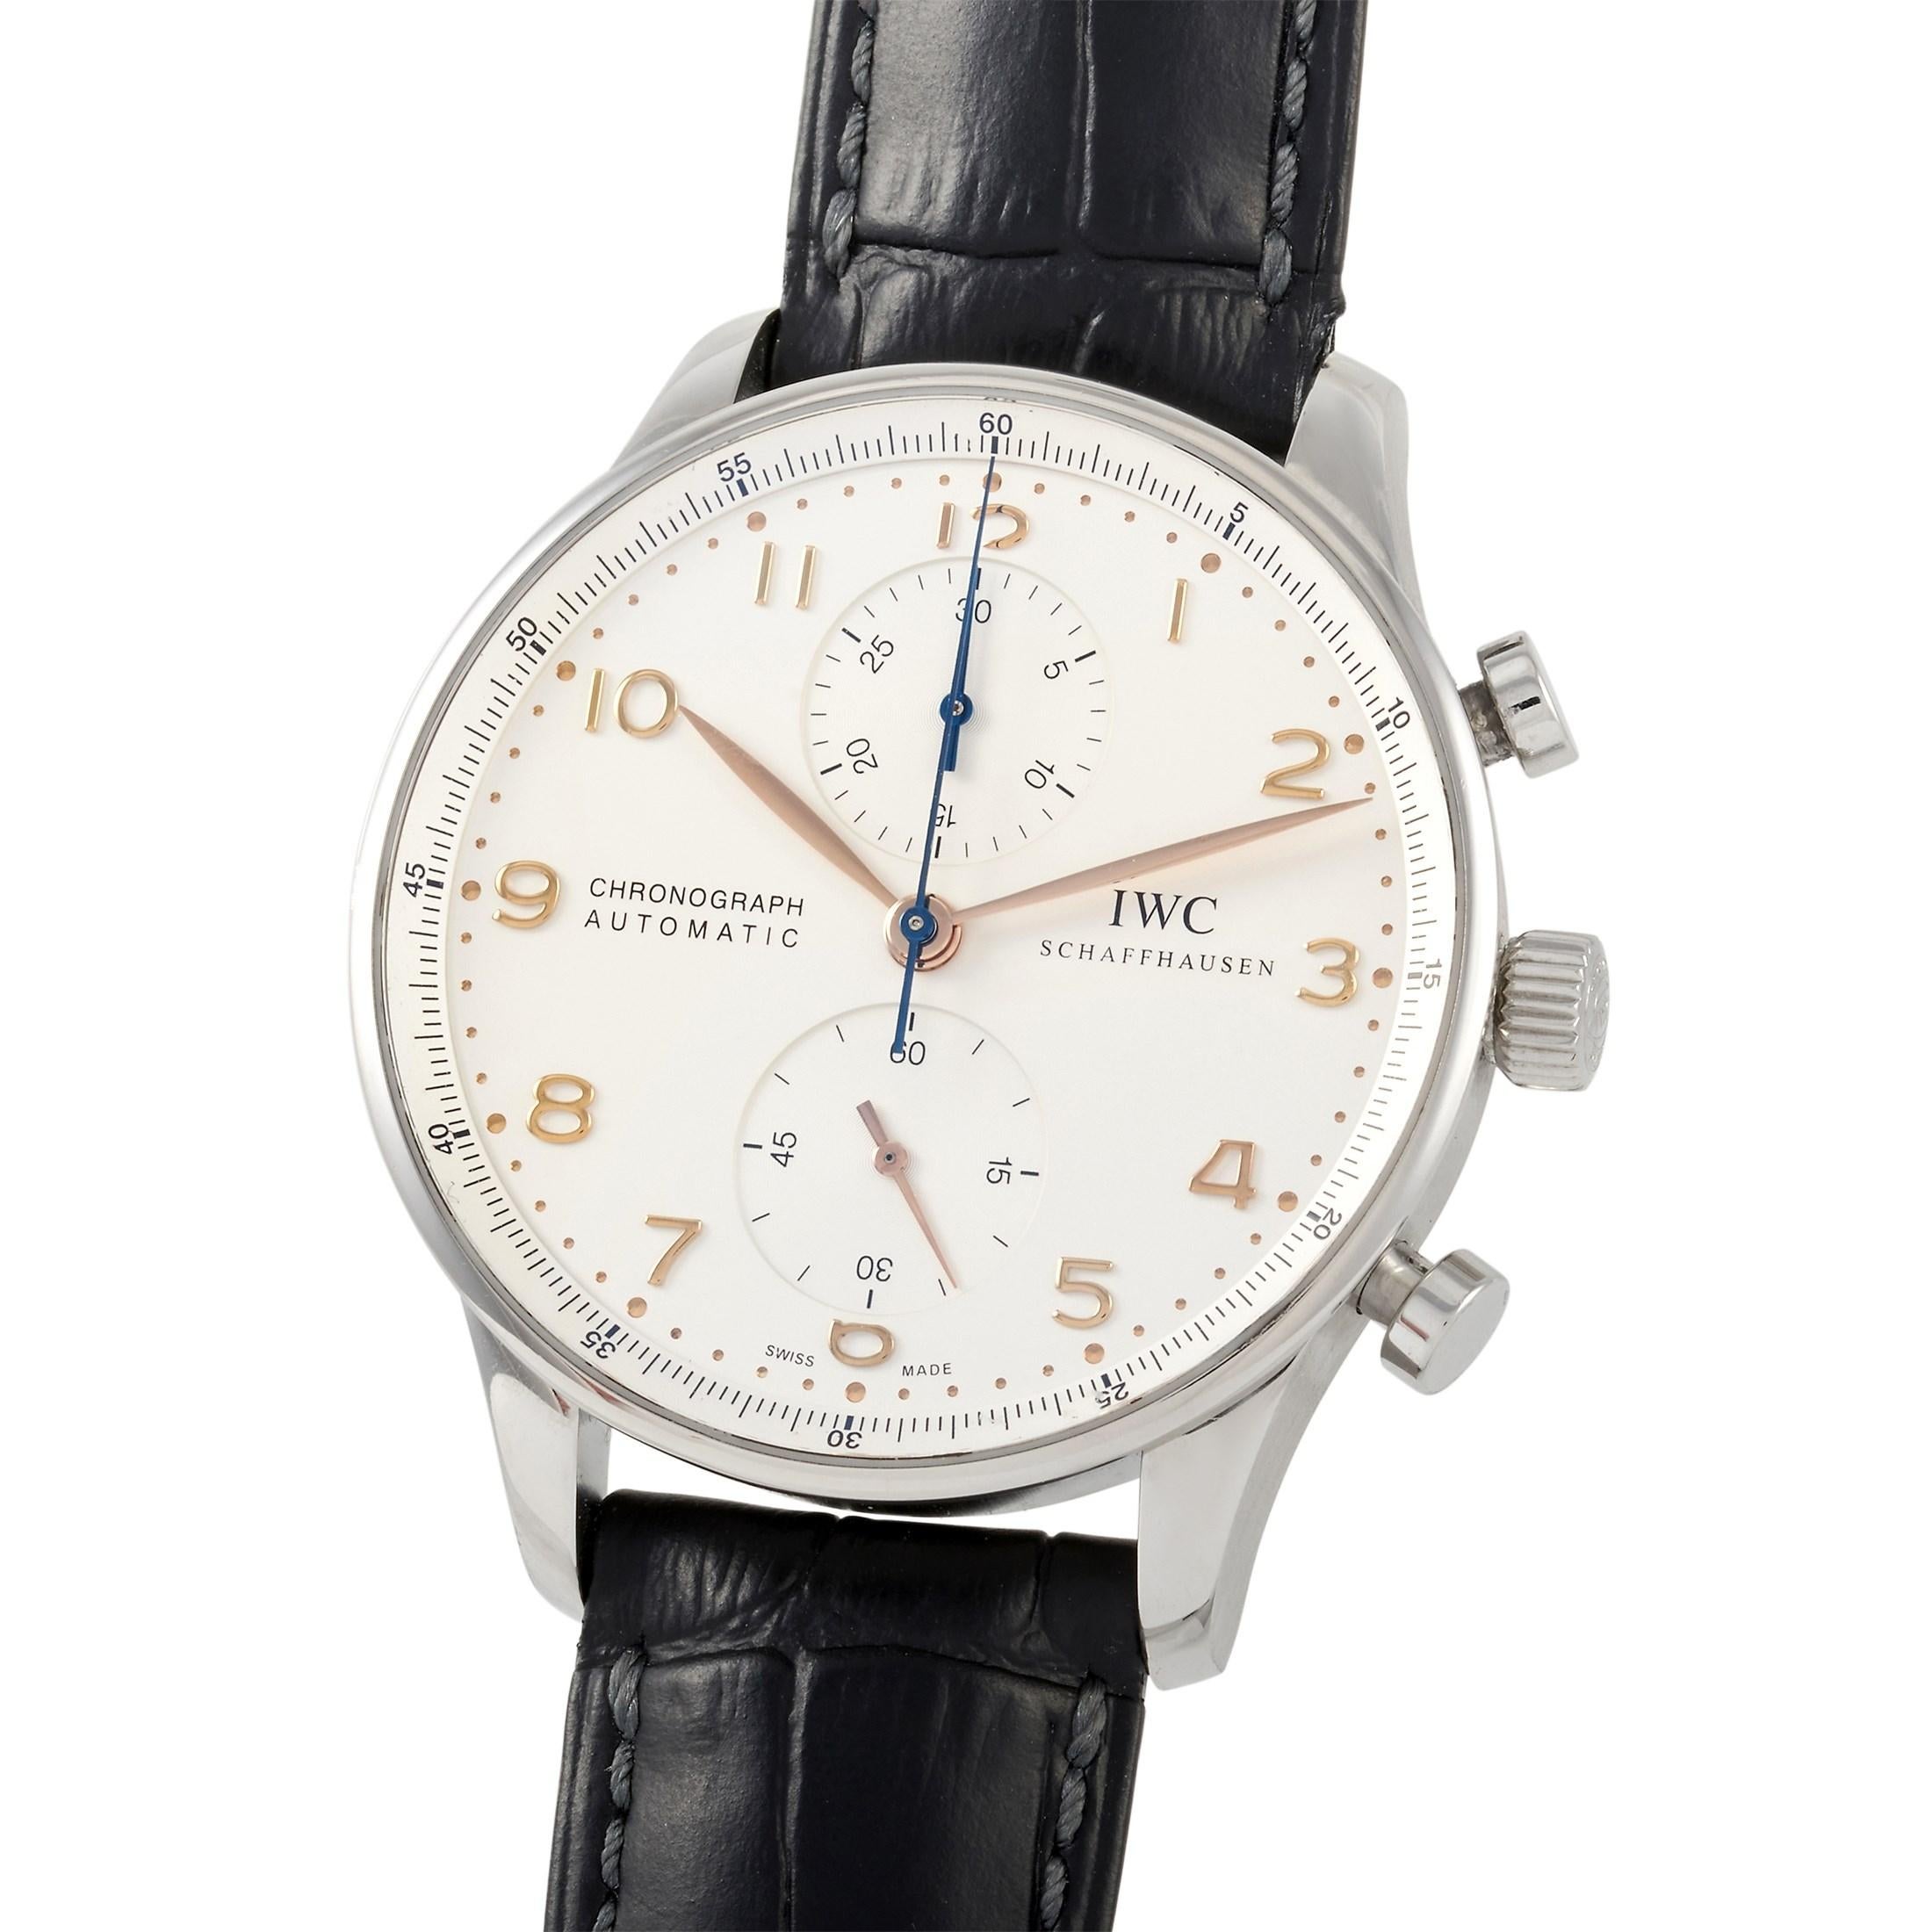 This IWC Portugieser Automatic Stainless Steel and Leather 40.9 mm Watch, reference number 371445, features a stainless steel case measuring 40.9 mm in diameter. It is presented on a sleek black alligator leather strap with tang clasp. The white